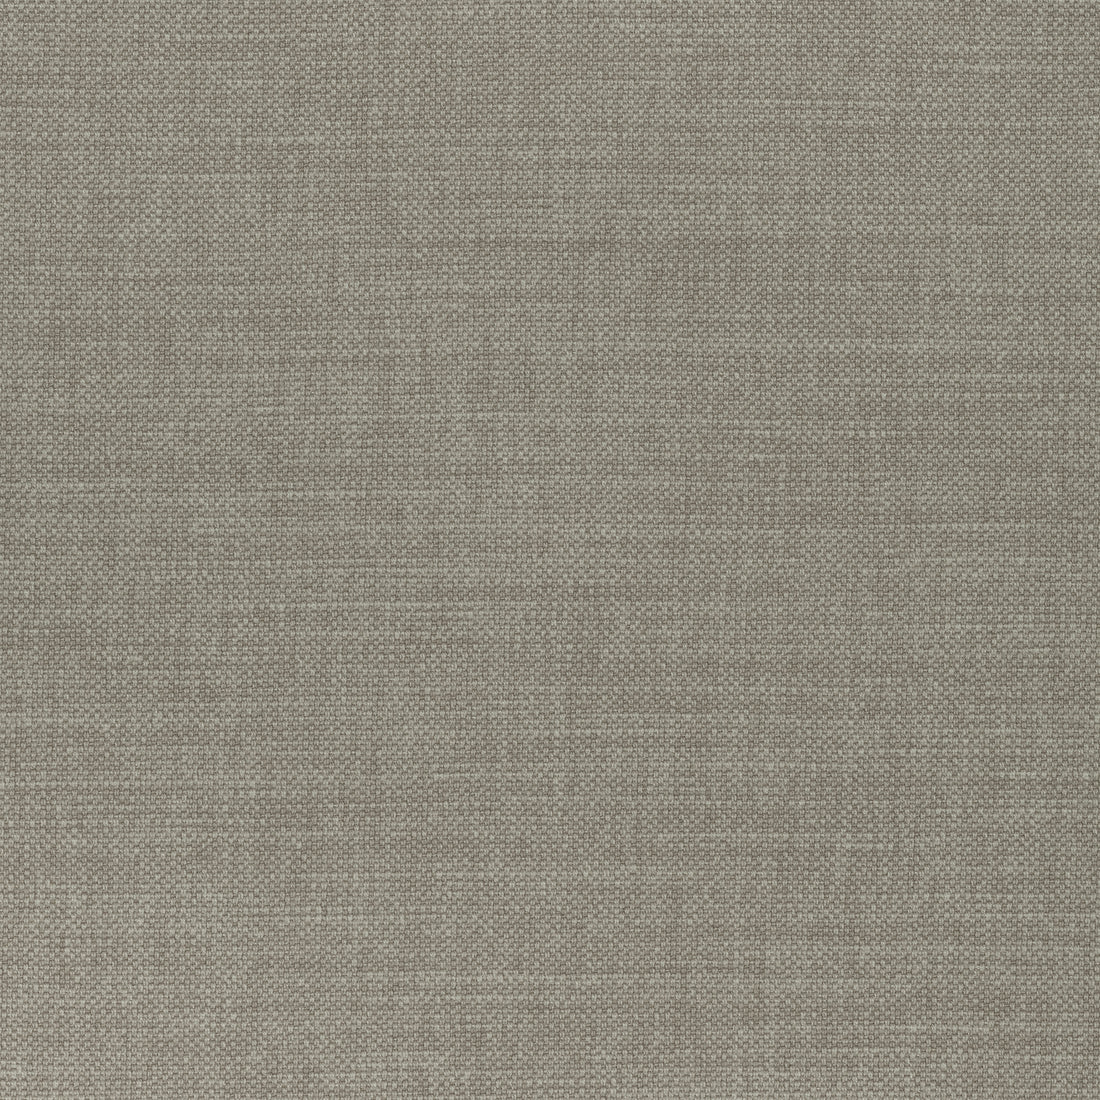 Prisma fabric in truffle color - pattern number W70121 - by Thibaut in the Woven Resource Vol 12 Prisma Fabrics collection